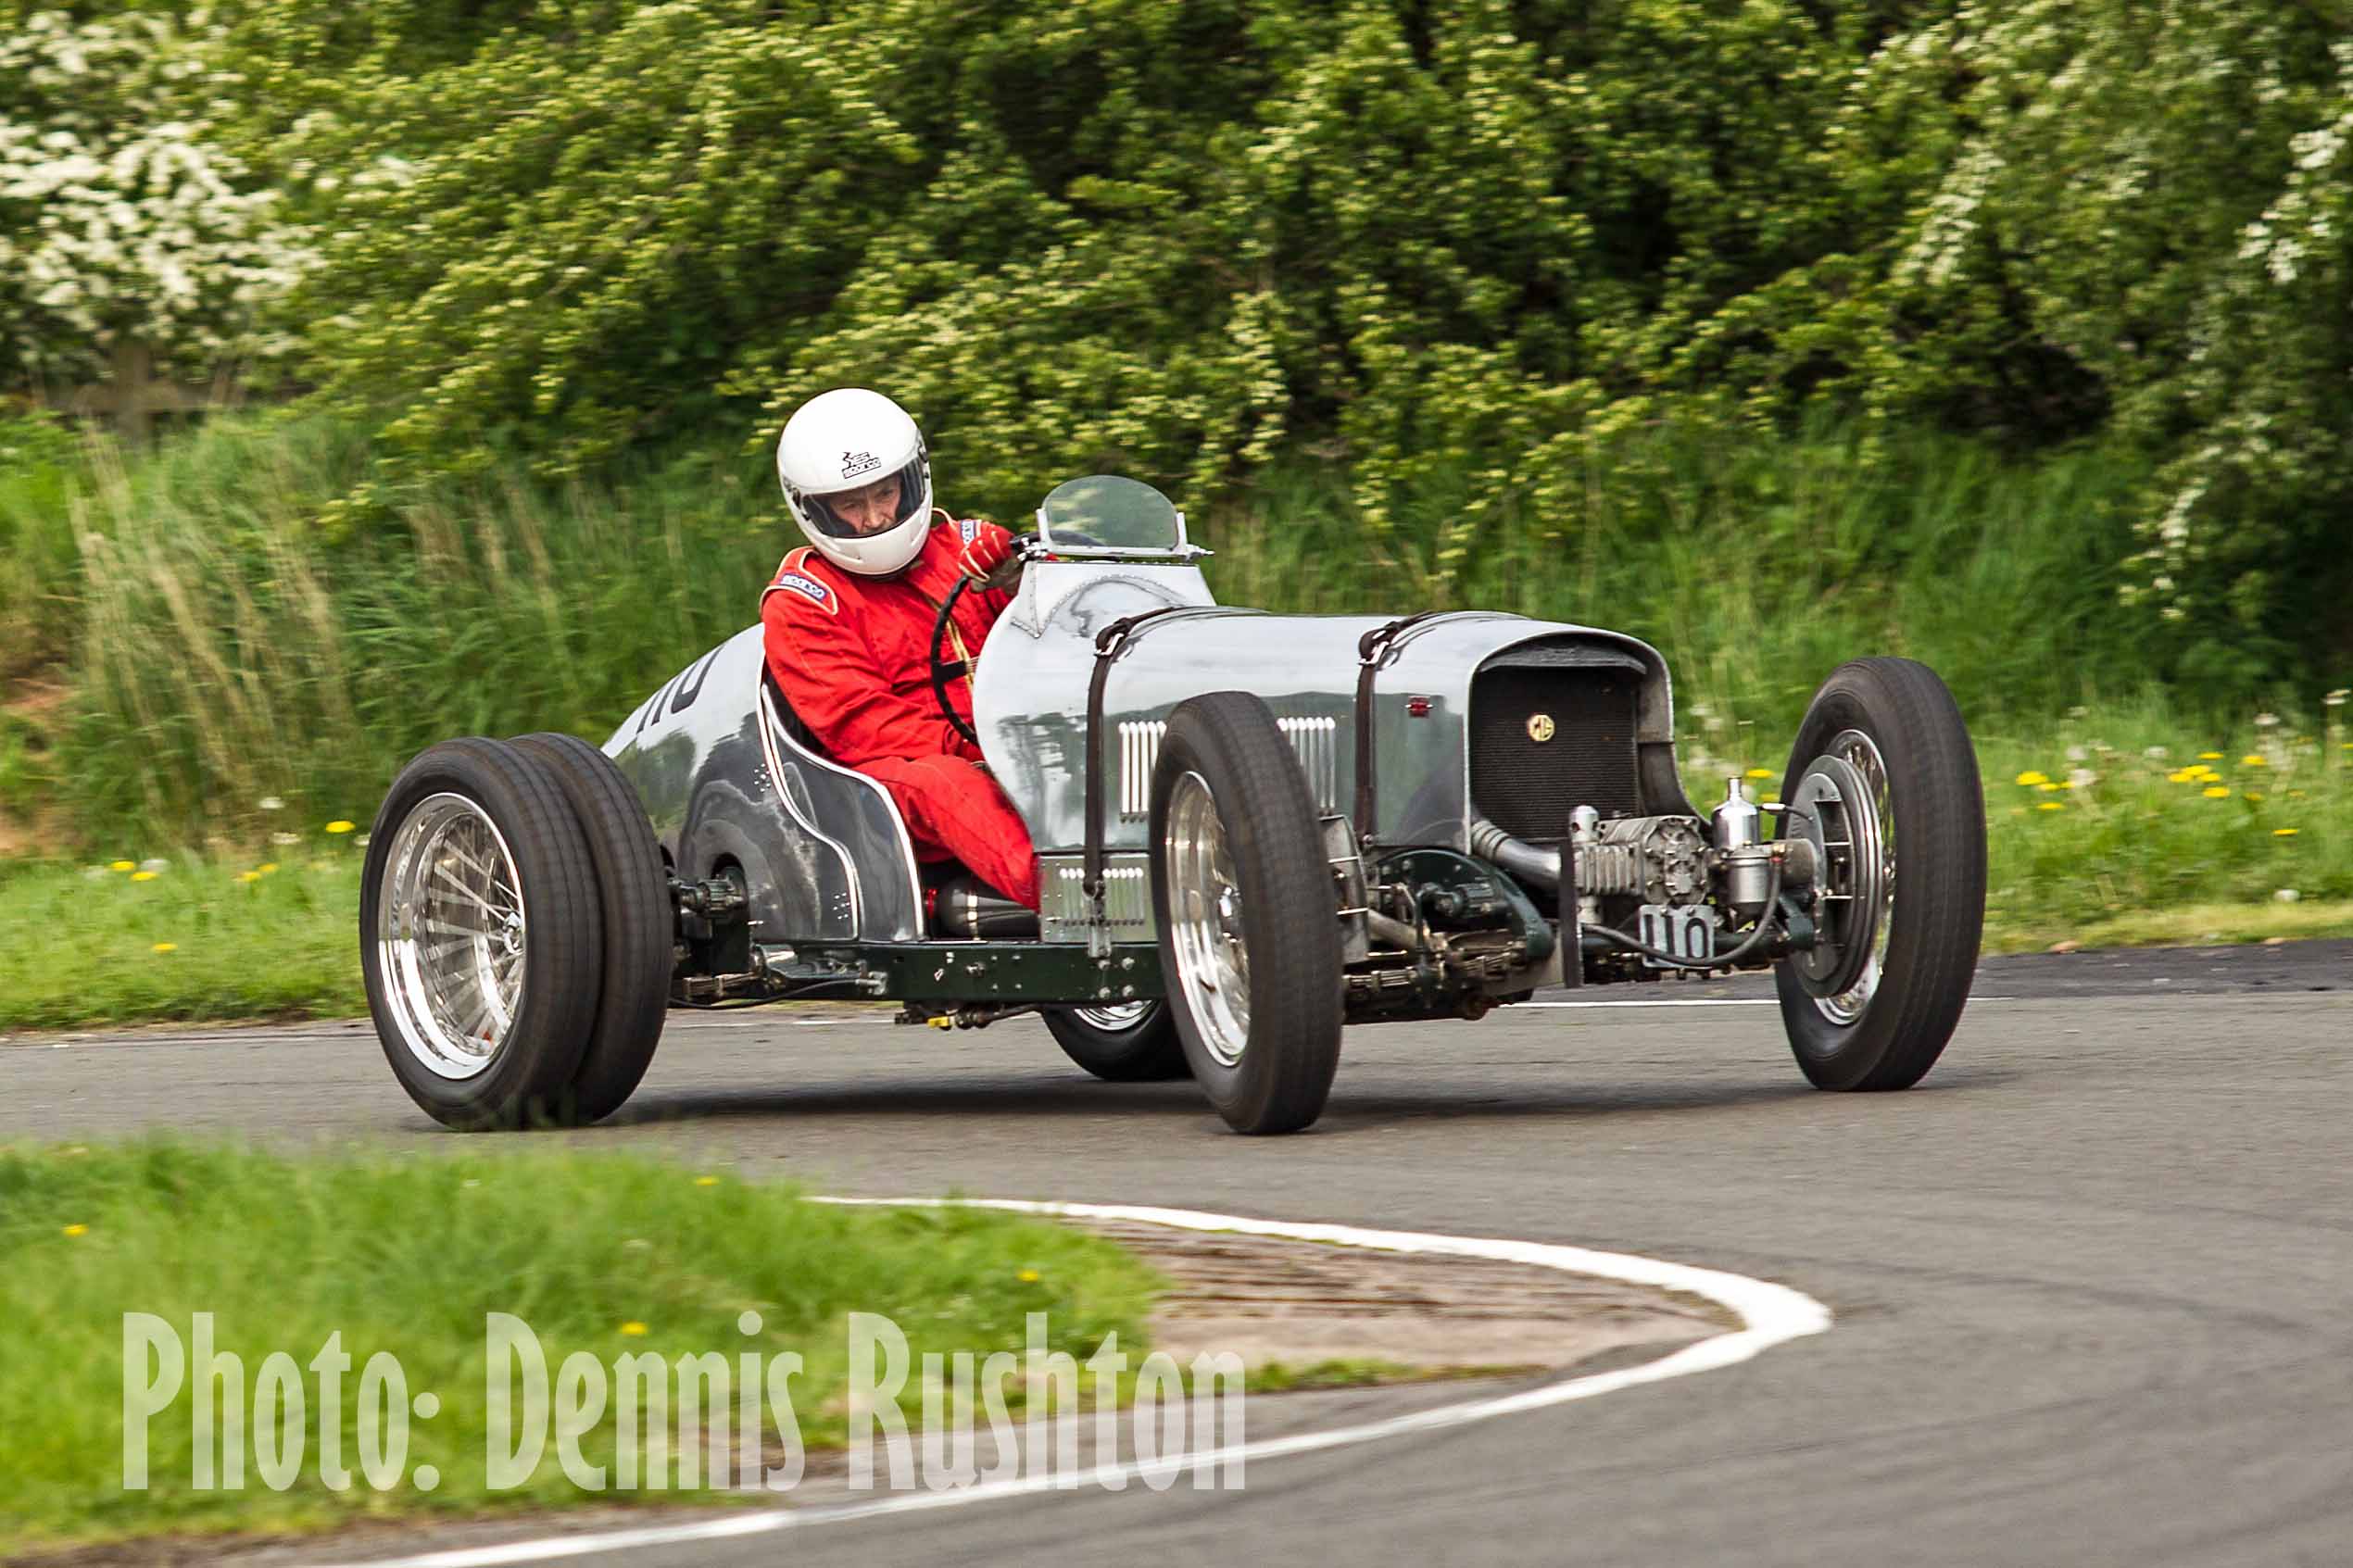 VSCC returns to Curborough this Bank Holiday Weekend to open its 2015 Speed Season cover